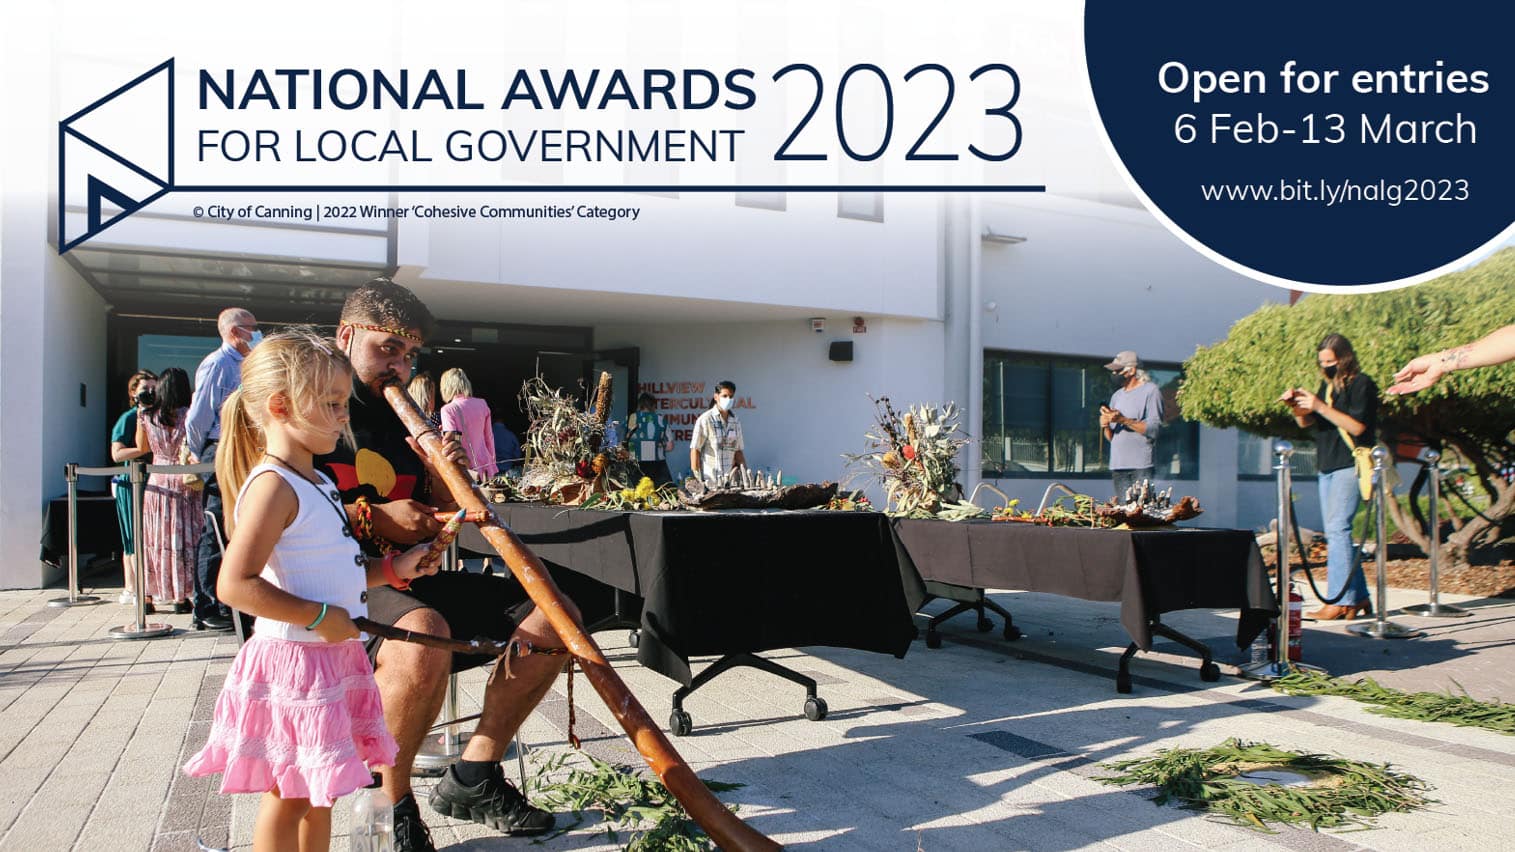 Now open: 2023 National Awards for Local Government